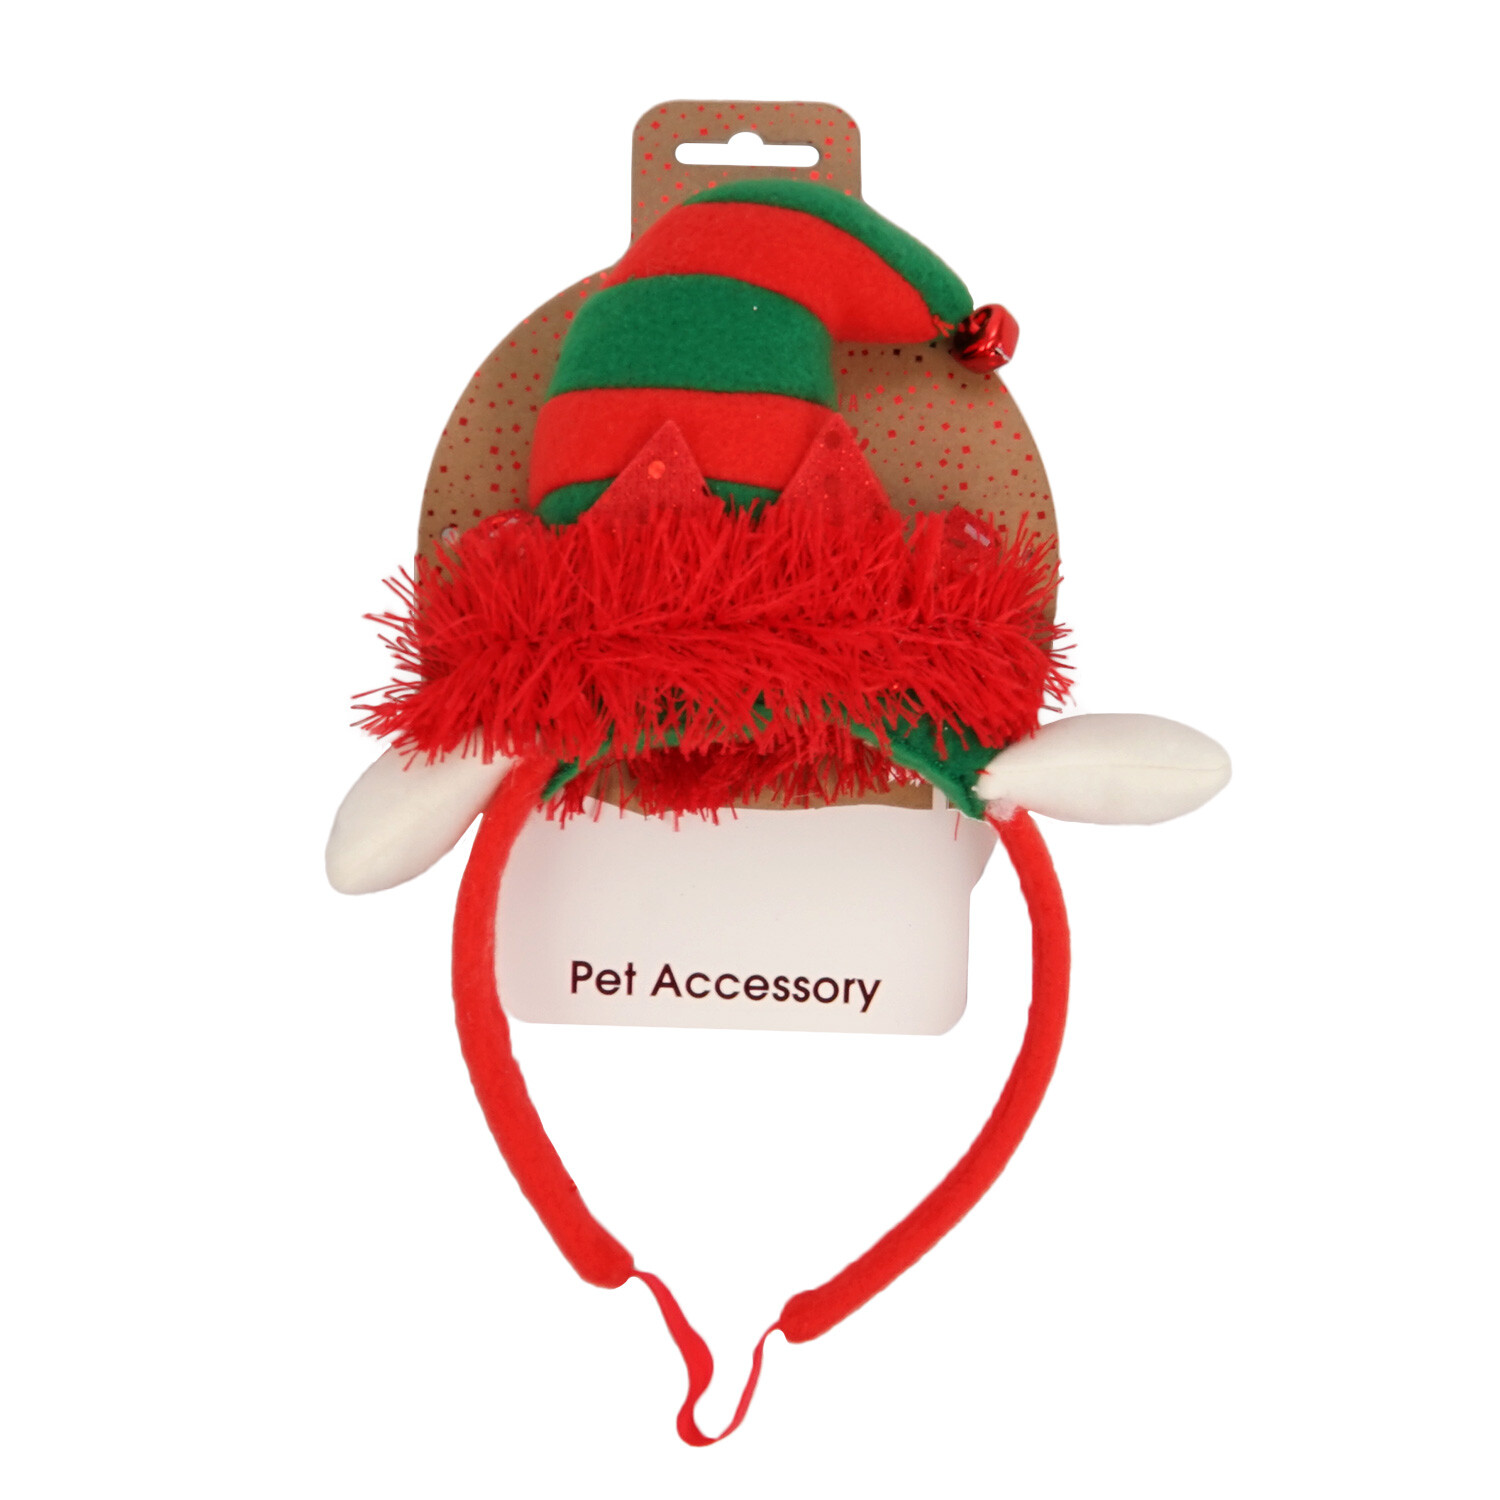 Elf Hat Pet Accessory - Red & Green Image